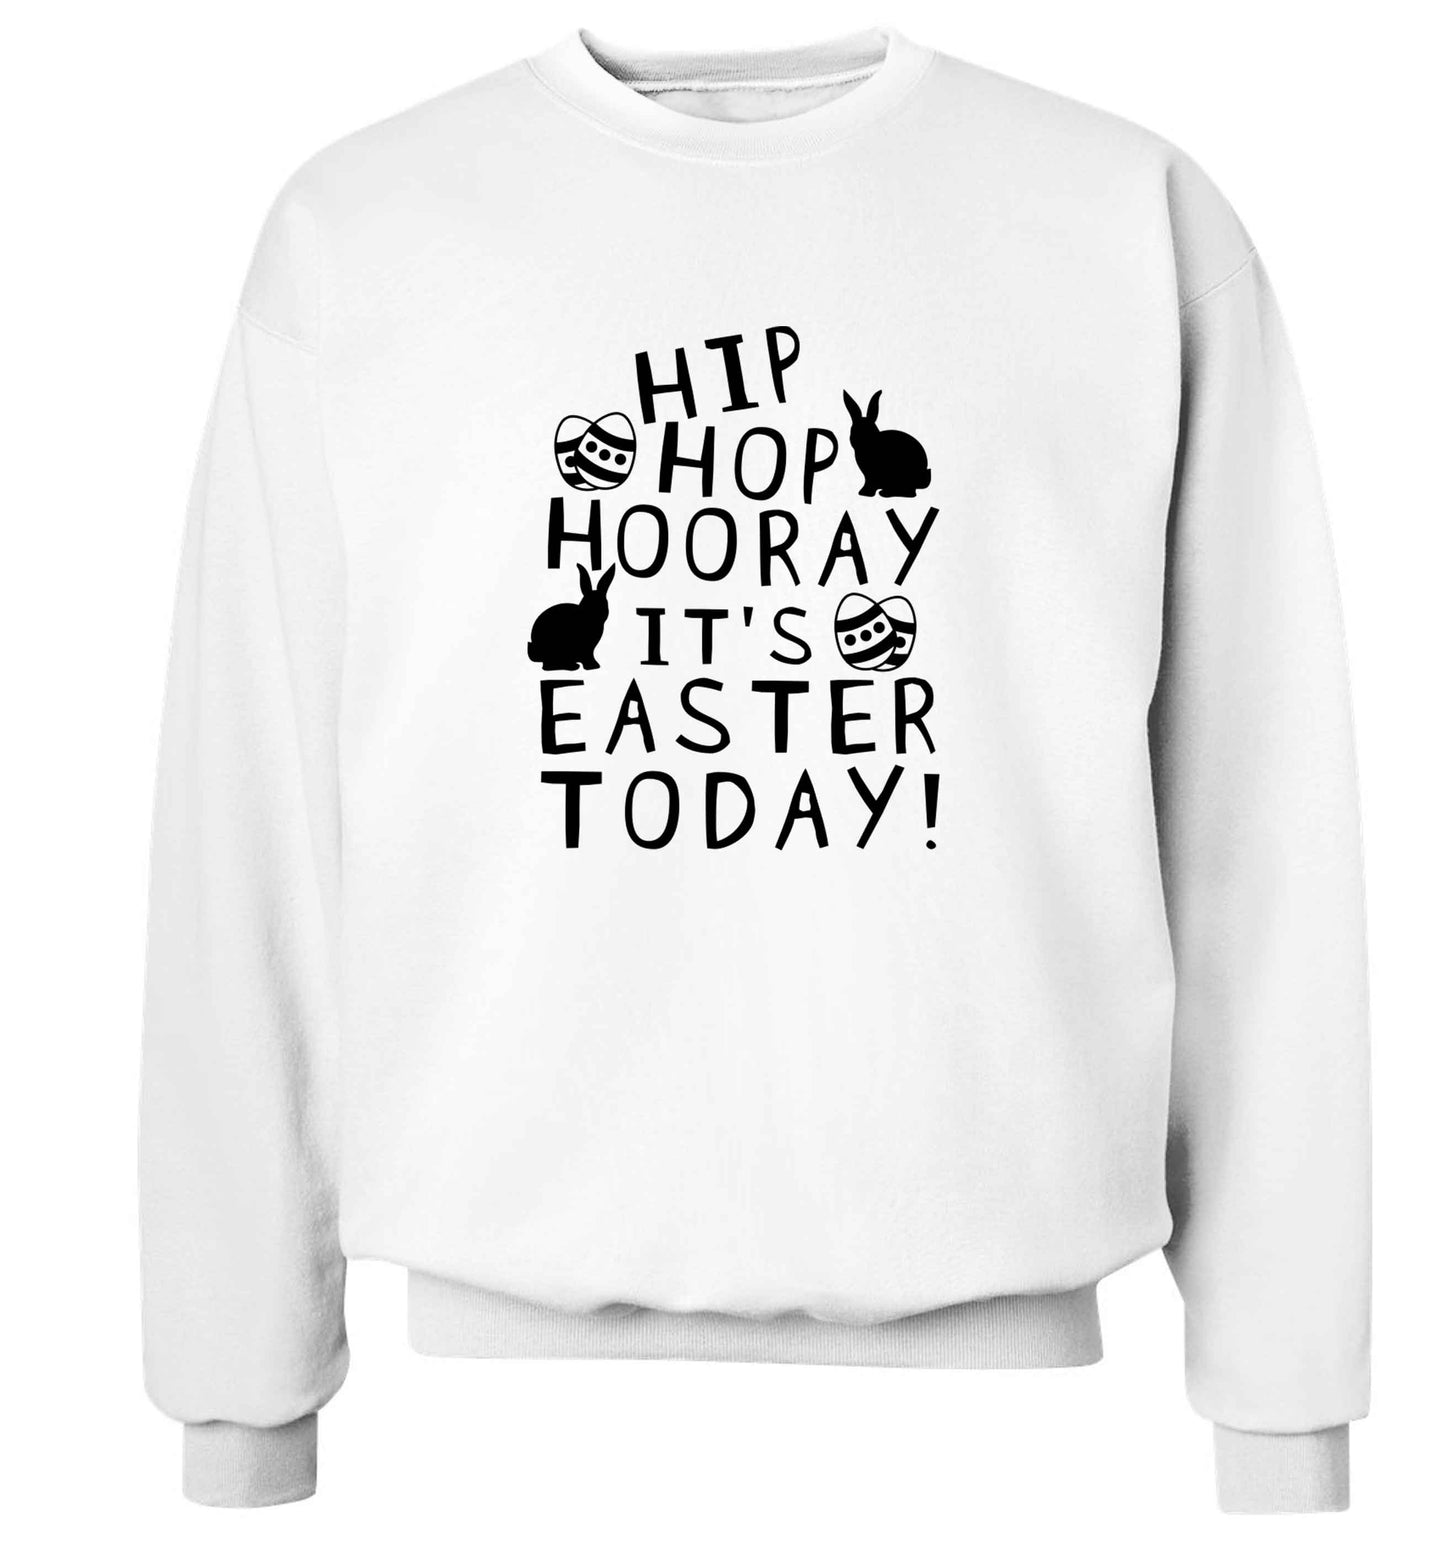 Hip hip hooray it's Easter today! adult's unisex white sweater 2XL